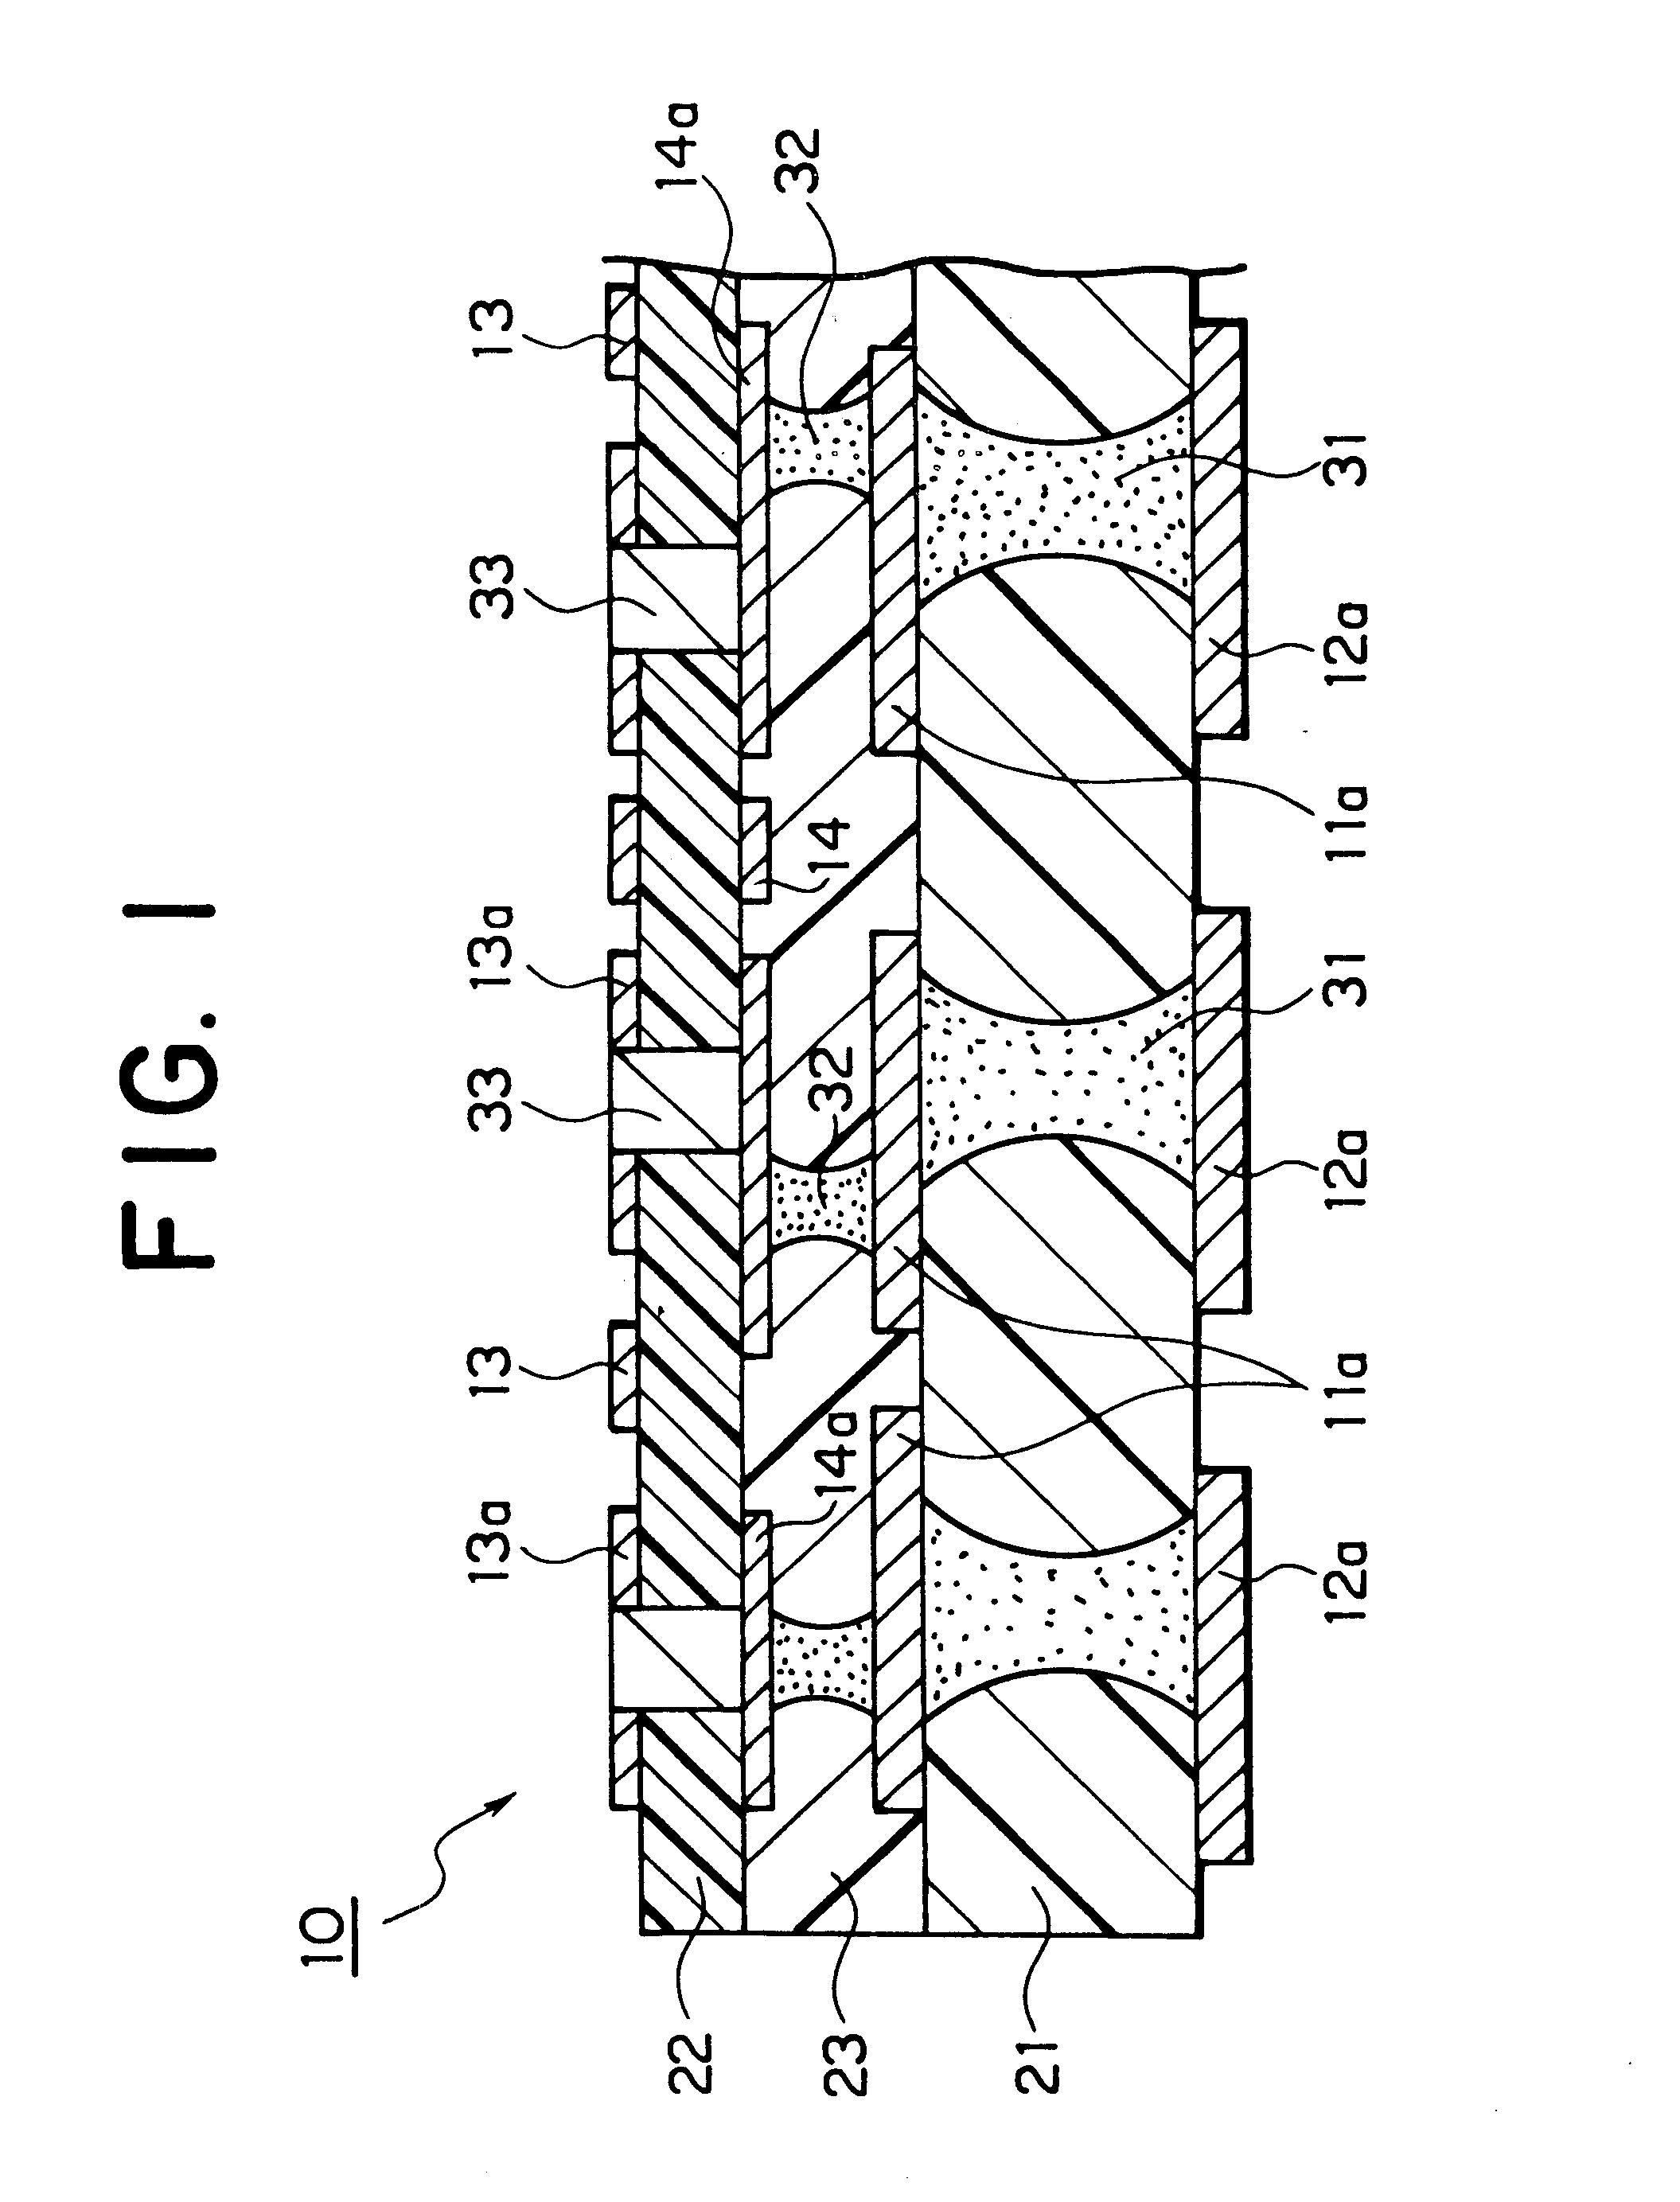 Hybrid wiring board, semiconductor apparatus, flexible substrate, and fabrication method of hybrid wiring board